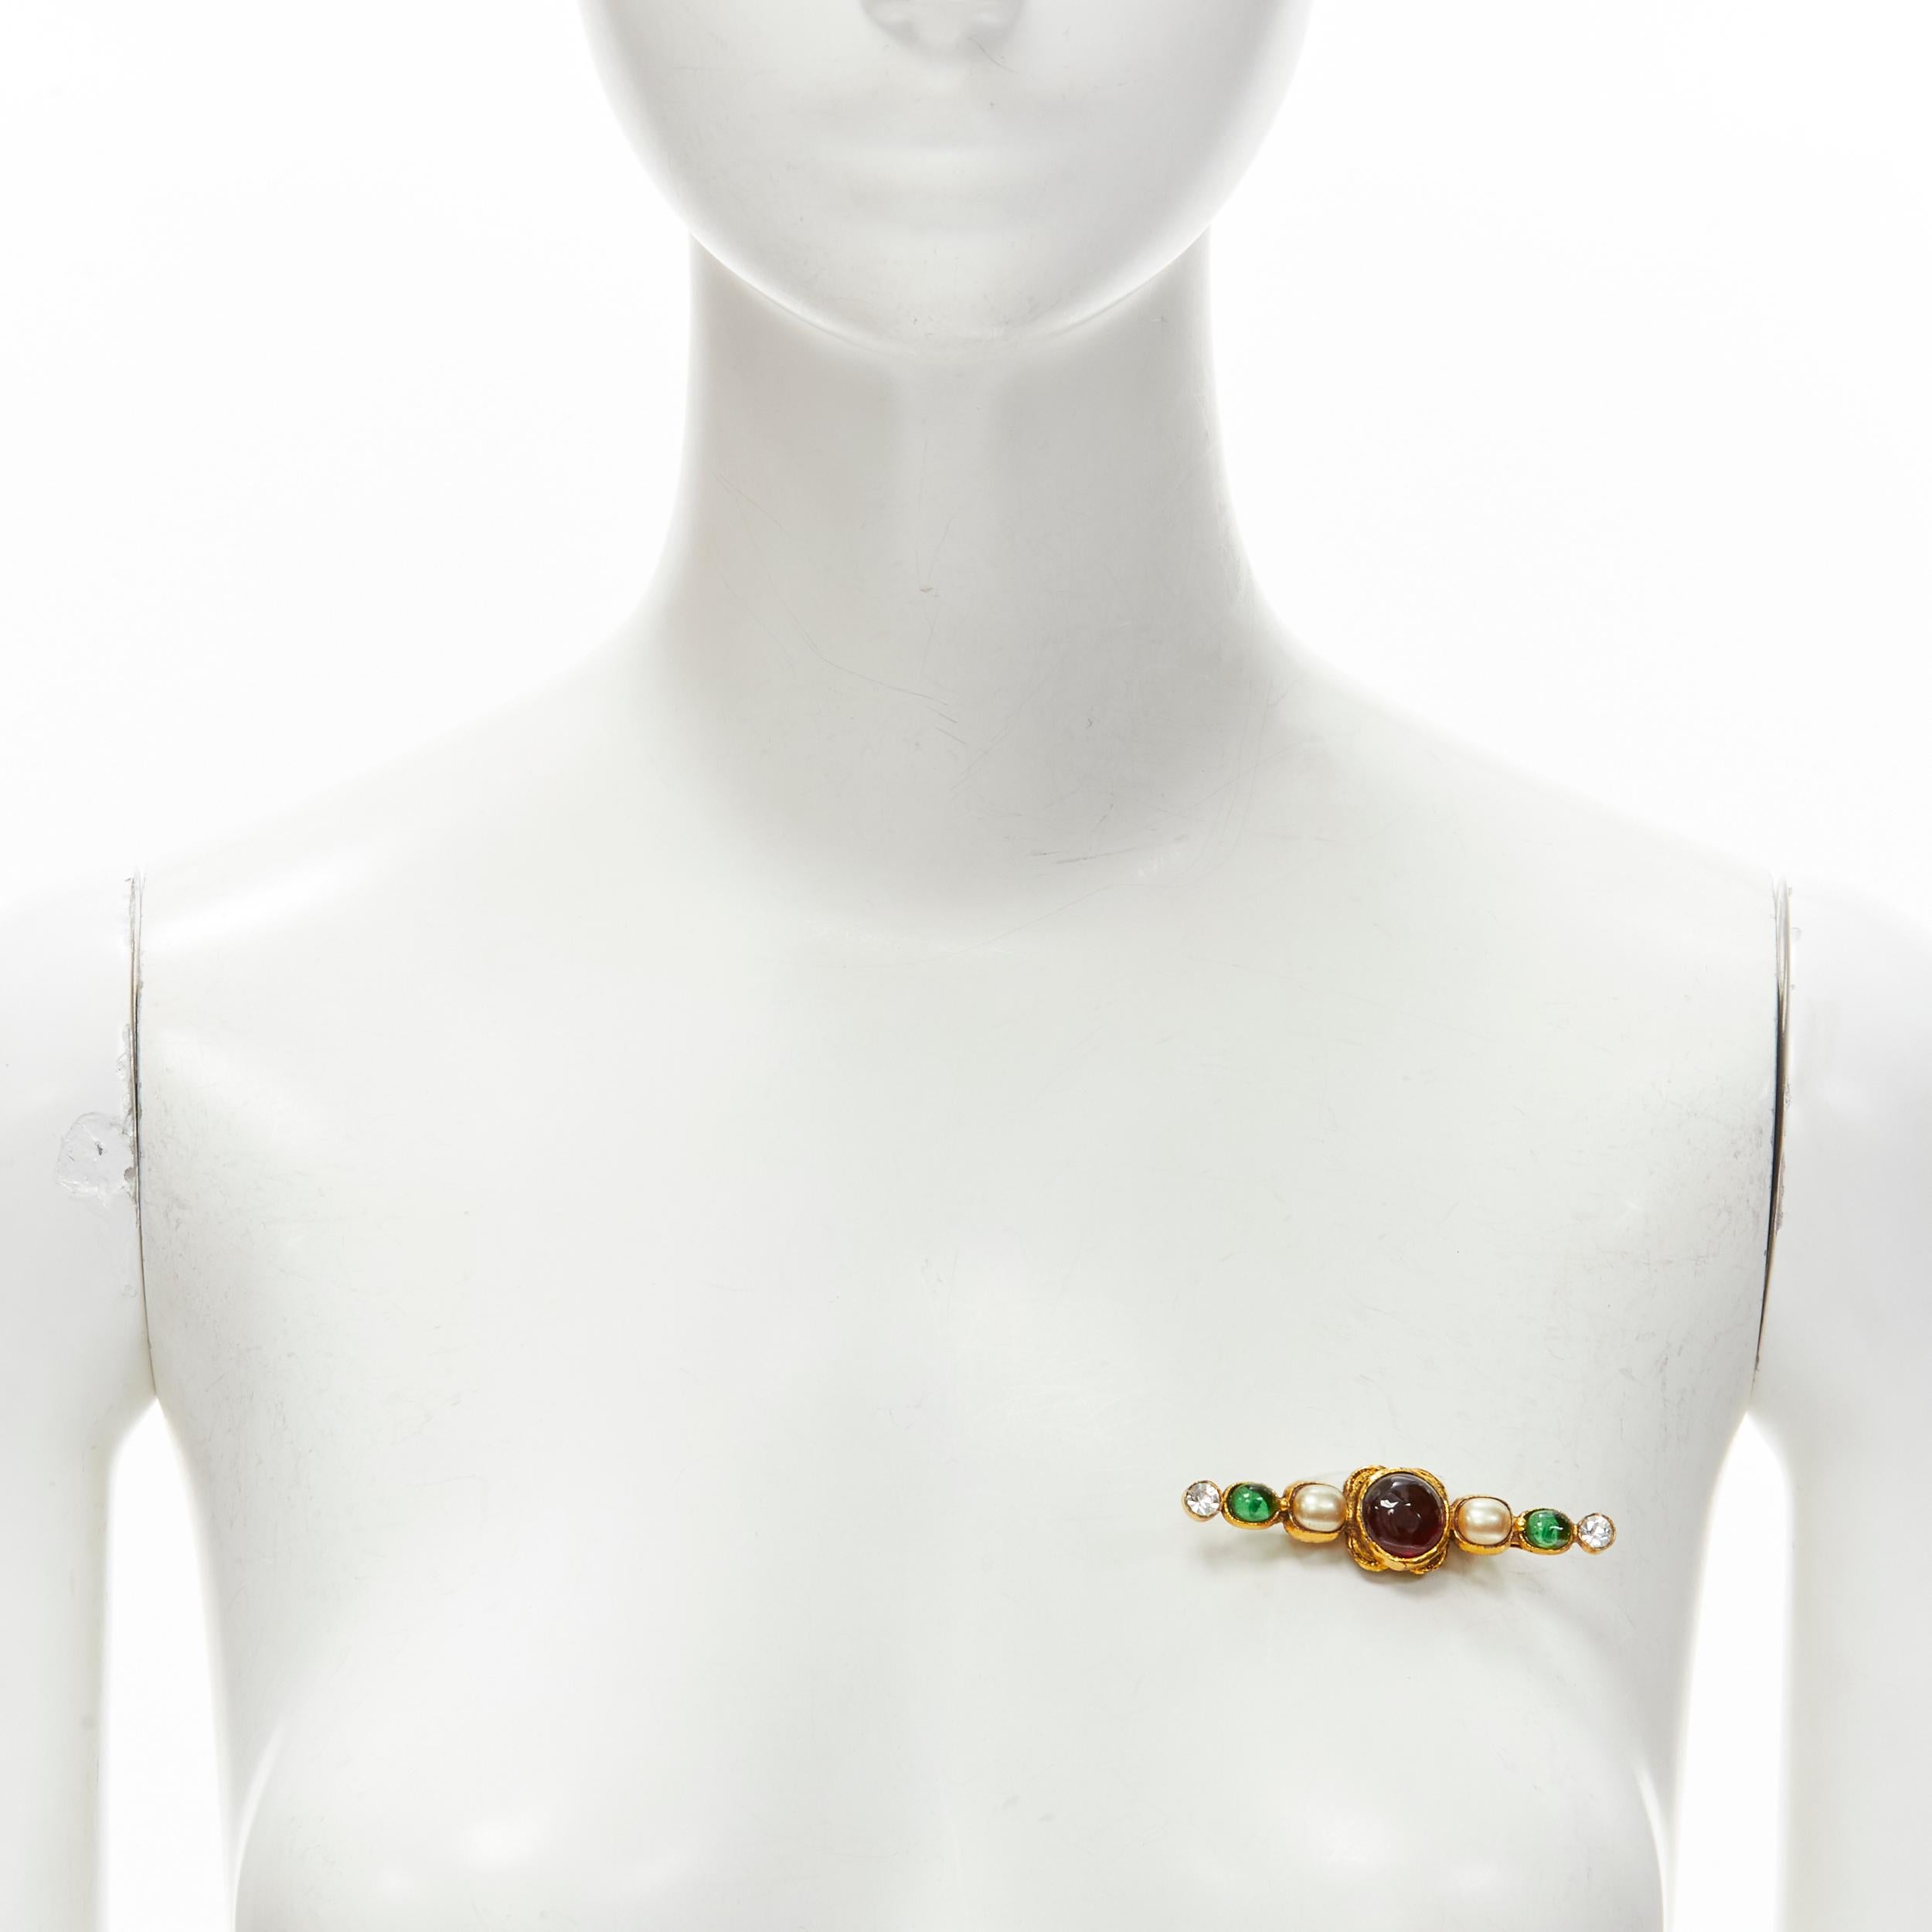 CHANEL Vintage 1985 gold gripoix pearl crystal jewel pin brooch
Brand: Chanel
Designer: Karl Lagerfeld
Collection: 1985 
Material: Metal
Color: Gold
Closure: Pin

CONDITION:
Condition: Excellent, this item was pre-owned and is in excellent